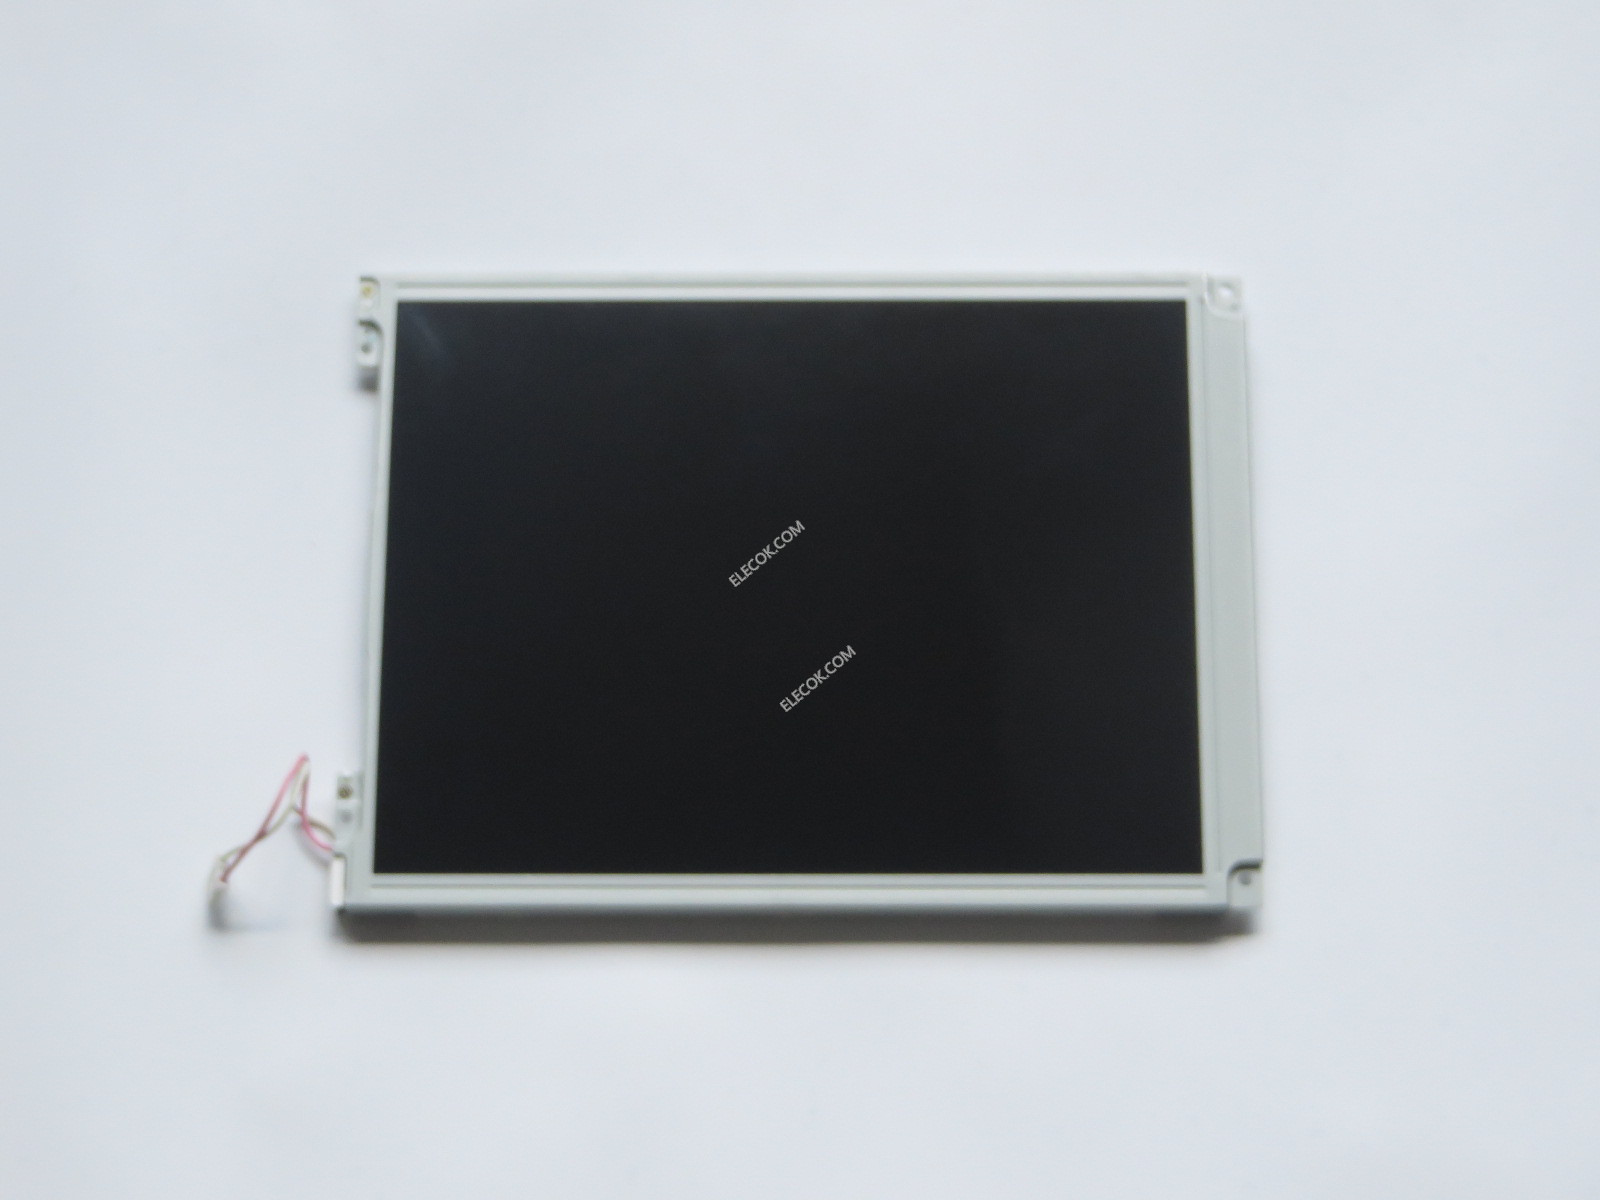 1PC Display LM-CH53-22NAP a-Si CSTN-LCD Panel 10.4" 640*480 for Sanyo 